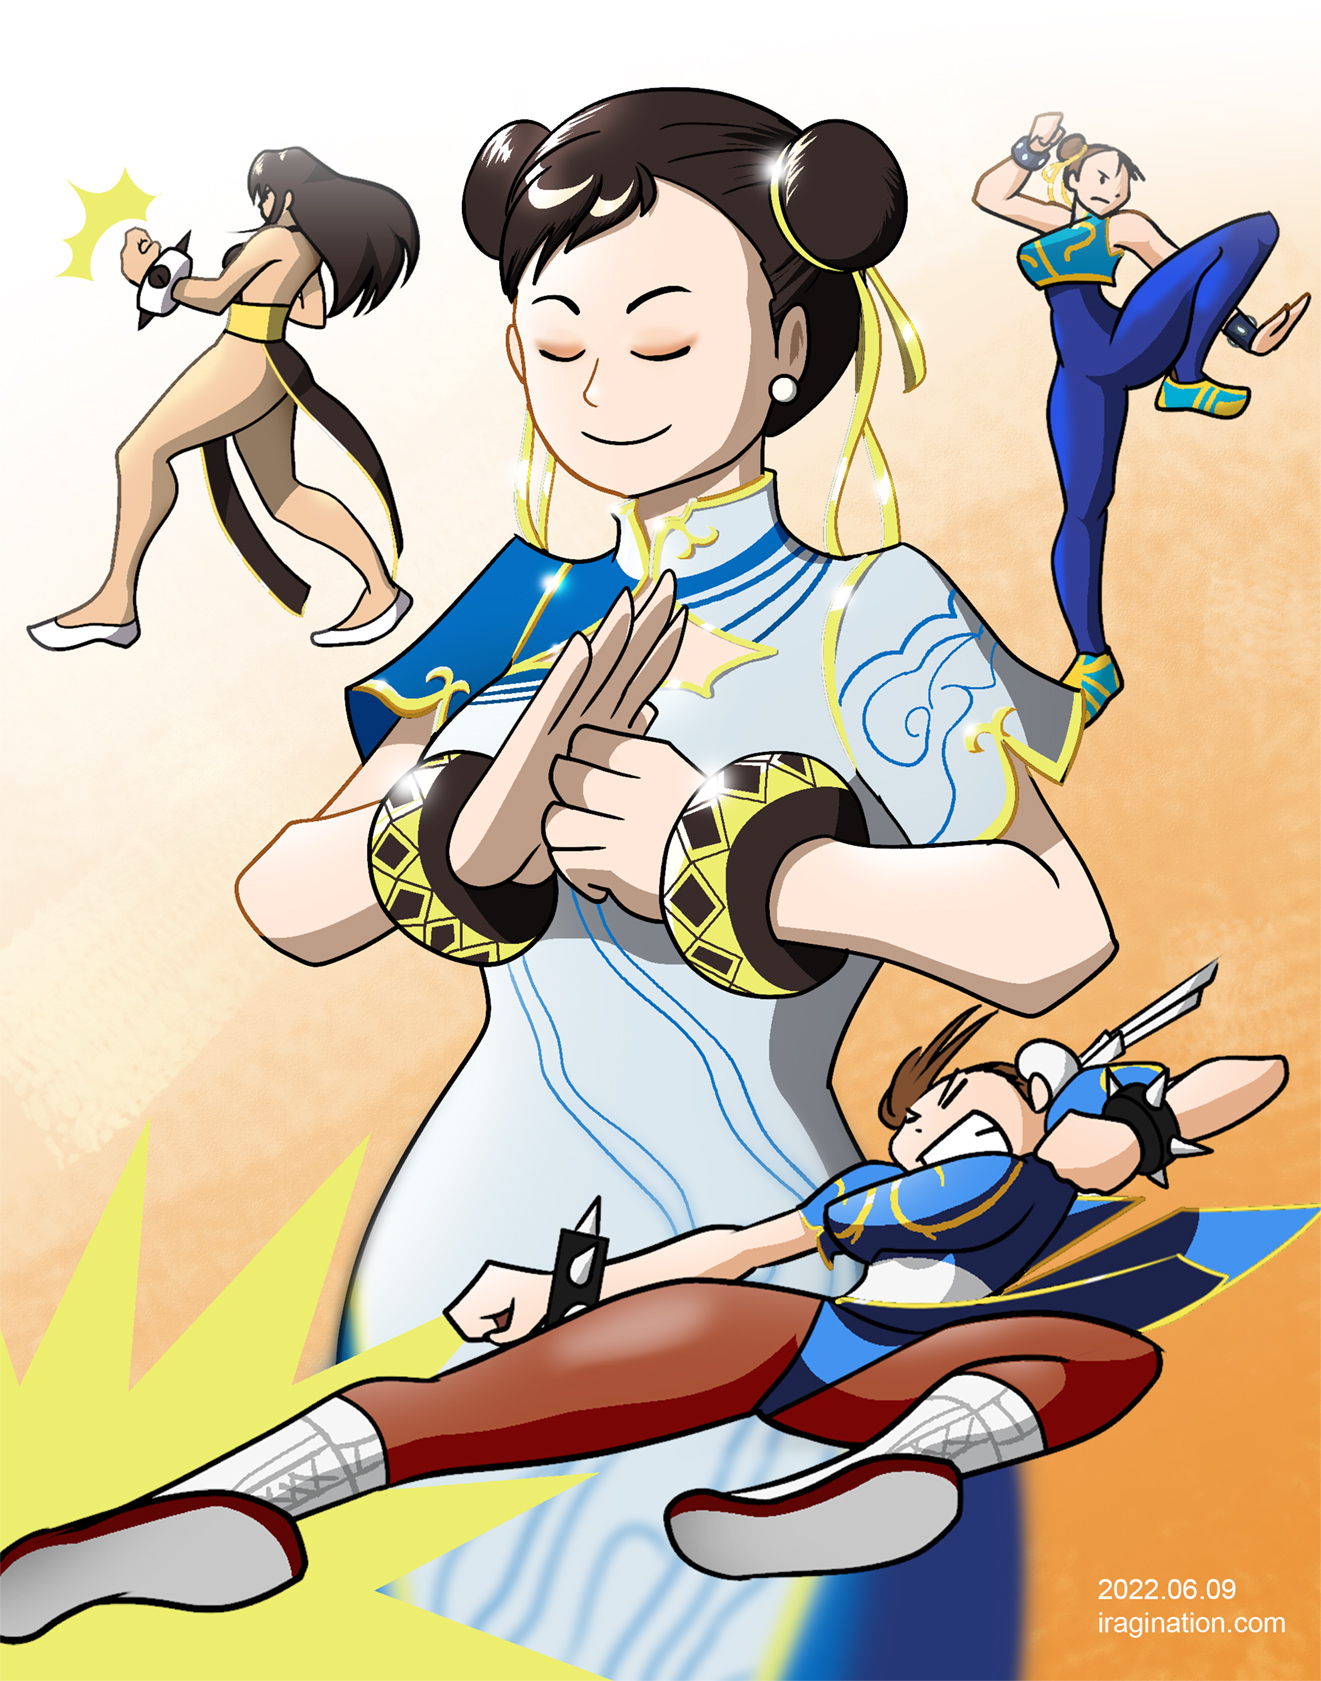 Chun-Li - Street Fighter 6
[b]Chun-Li[/b] is a character from the [b]Street Fighter[/b] series, a game that is all the rage with the recent [url=https://youtu.be/GZud-p0QRvA]Street Fighter 6 - Announce Trailer[/url]. 

I did not do much planning for this illustration, but as usual, I was doodling around, and this set of drawings did not come half bad, so I ended up coloring it. It is essentially a homage to Chun-Li and her many appearances in the Street Fighter series. I used to draw her a lot back in the day before I even had Internet access, and all my references came from video game magazines. As you can imagine, this was a very frustrating exercise with little to no progress. I like to think I have improved a bit after all these years so I gave it a try.

The central theme is, of course, Chun-Li’s Street Fighter 6 outfit, revealed in the trailer. I really liked how calm and composed she looks there. Here, I guess she’s having some nostalgic memories about her past selves.

The top left is her amazing black dress from [b]Street Fighter V[/b]. The top right is from her younger years in [b]Street Fighter Alpha[/b].

For the last pose at the bottom, I used her original [b]Street Fighter 2[/b] costume. As I was drawing it, I was actually thinking of a scene from [b]Marvel vs Capcom[/b] that I saw in the arcades. I could not find a reference, so I drew it based solely on memories. My excuse is that I thought she has to go all out when fighting mutants and aliens.

As for the game, and I am not keeping up much with the news, honestly, I was not too fond of this repeated attempt of aging up the original characters to introduce a new set of fighters. This might sound hip or like a natural progression, but they already tried this back in the late 90s with [b]Street Fighter 3[/b]. Urban music included. It was even more extreme back then, with a roster where [b]Ryu[/b] was the only returning character from previous games. And they introduced [url=https://streetfighter.fandom.com/wiki/Alex]Alex[/url] as [i]the new face of Street Fighter[/i] or whatever. How did that work out for Alex? Anyway, let’s see how they handle it this time. And maybe look forward to Street Fighter 7 where everyone is young again and [b]M. Bison[/b] is back.

Street Fighter (C) CAPCOM

Keywords: chun-li